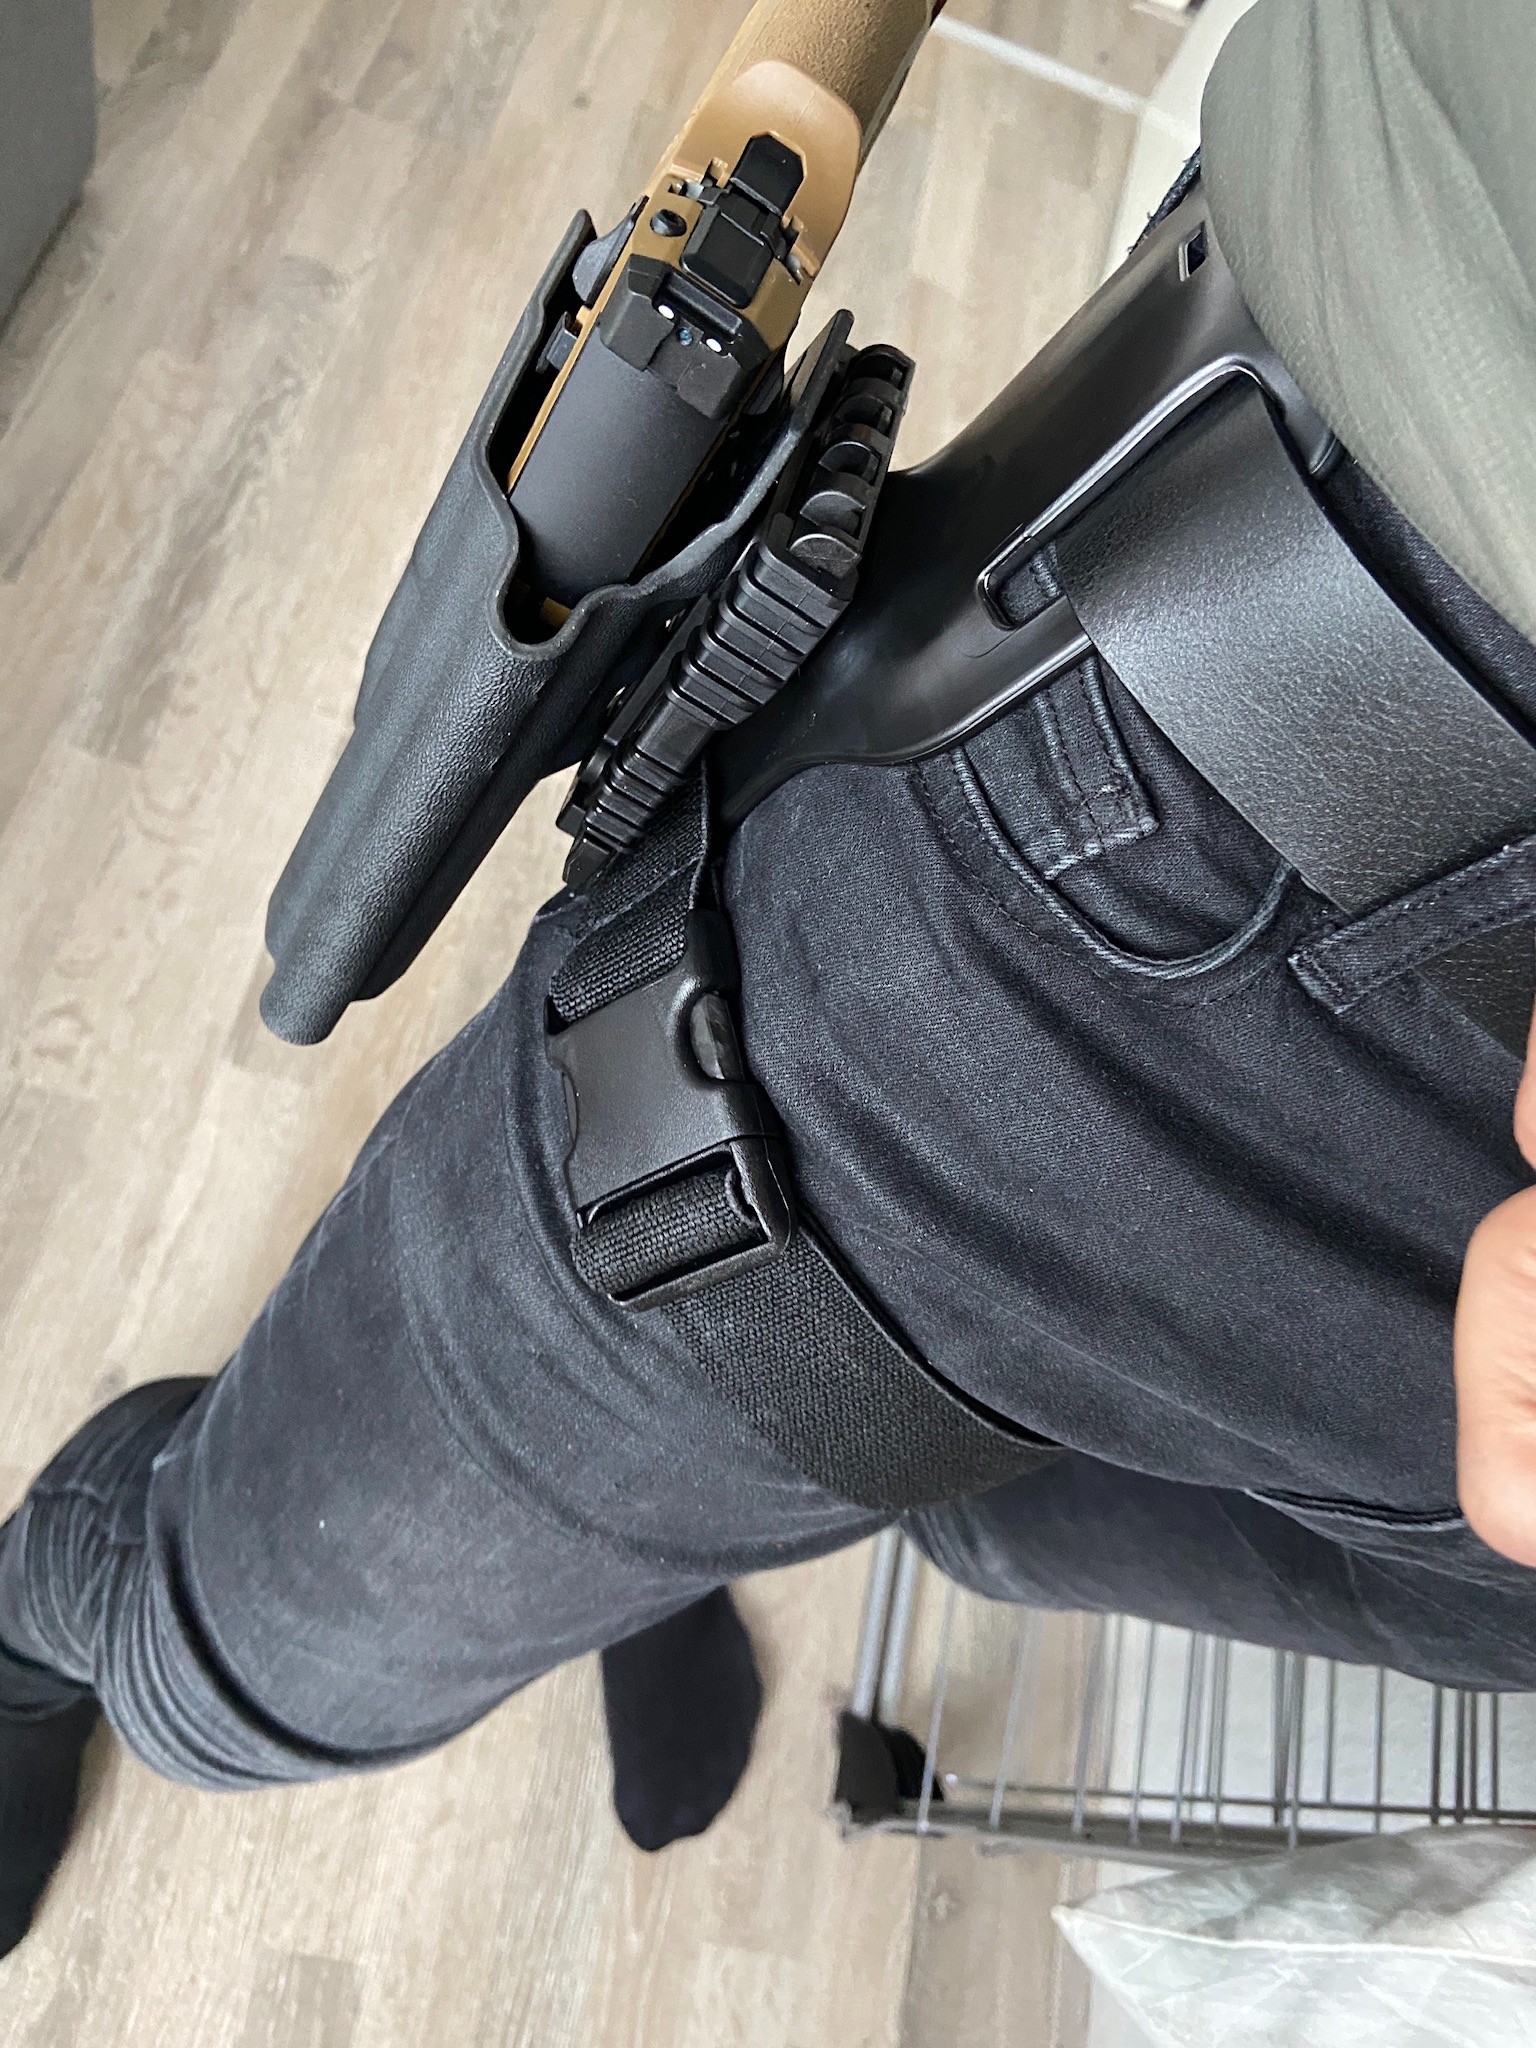 T.REX ARMS - Ragnarok holster on a Mid Ride UBL + QLS Fork / Plate